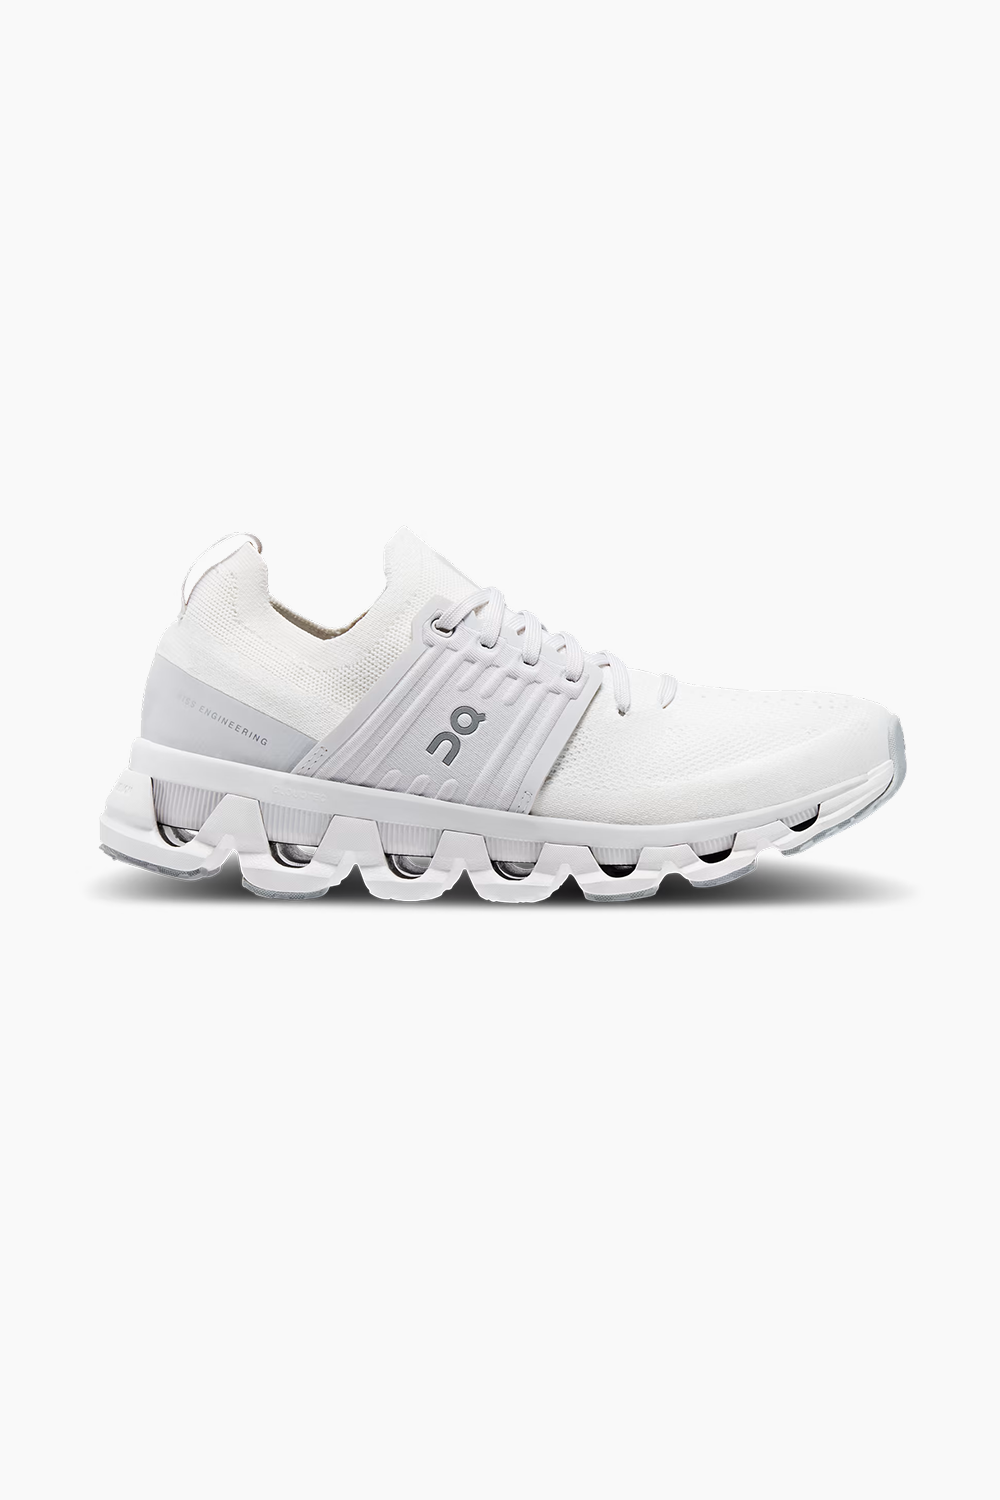 ON | Women's Cloudswift 3 in White/Frost